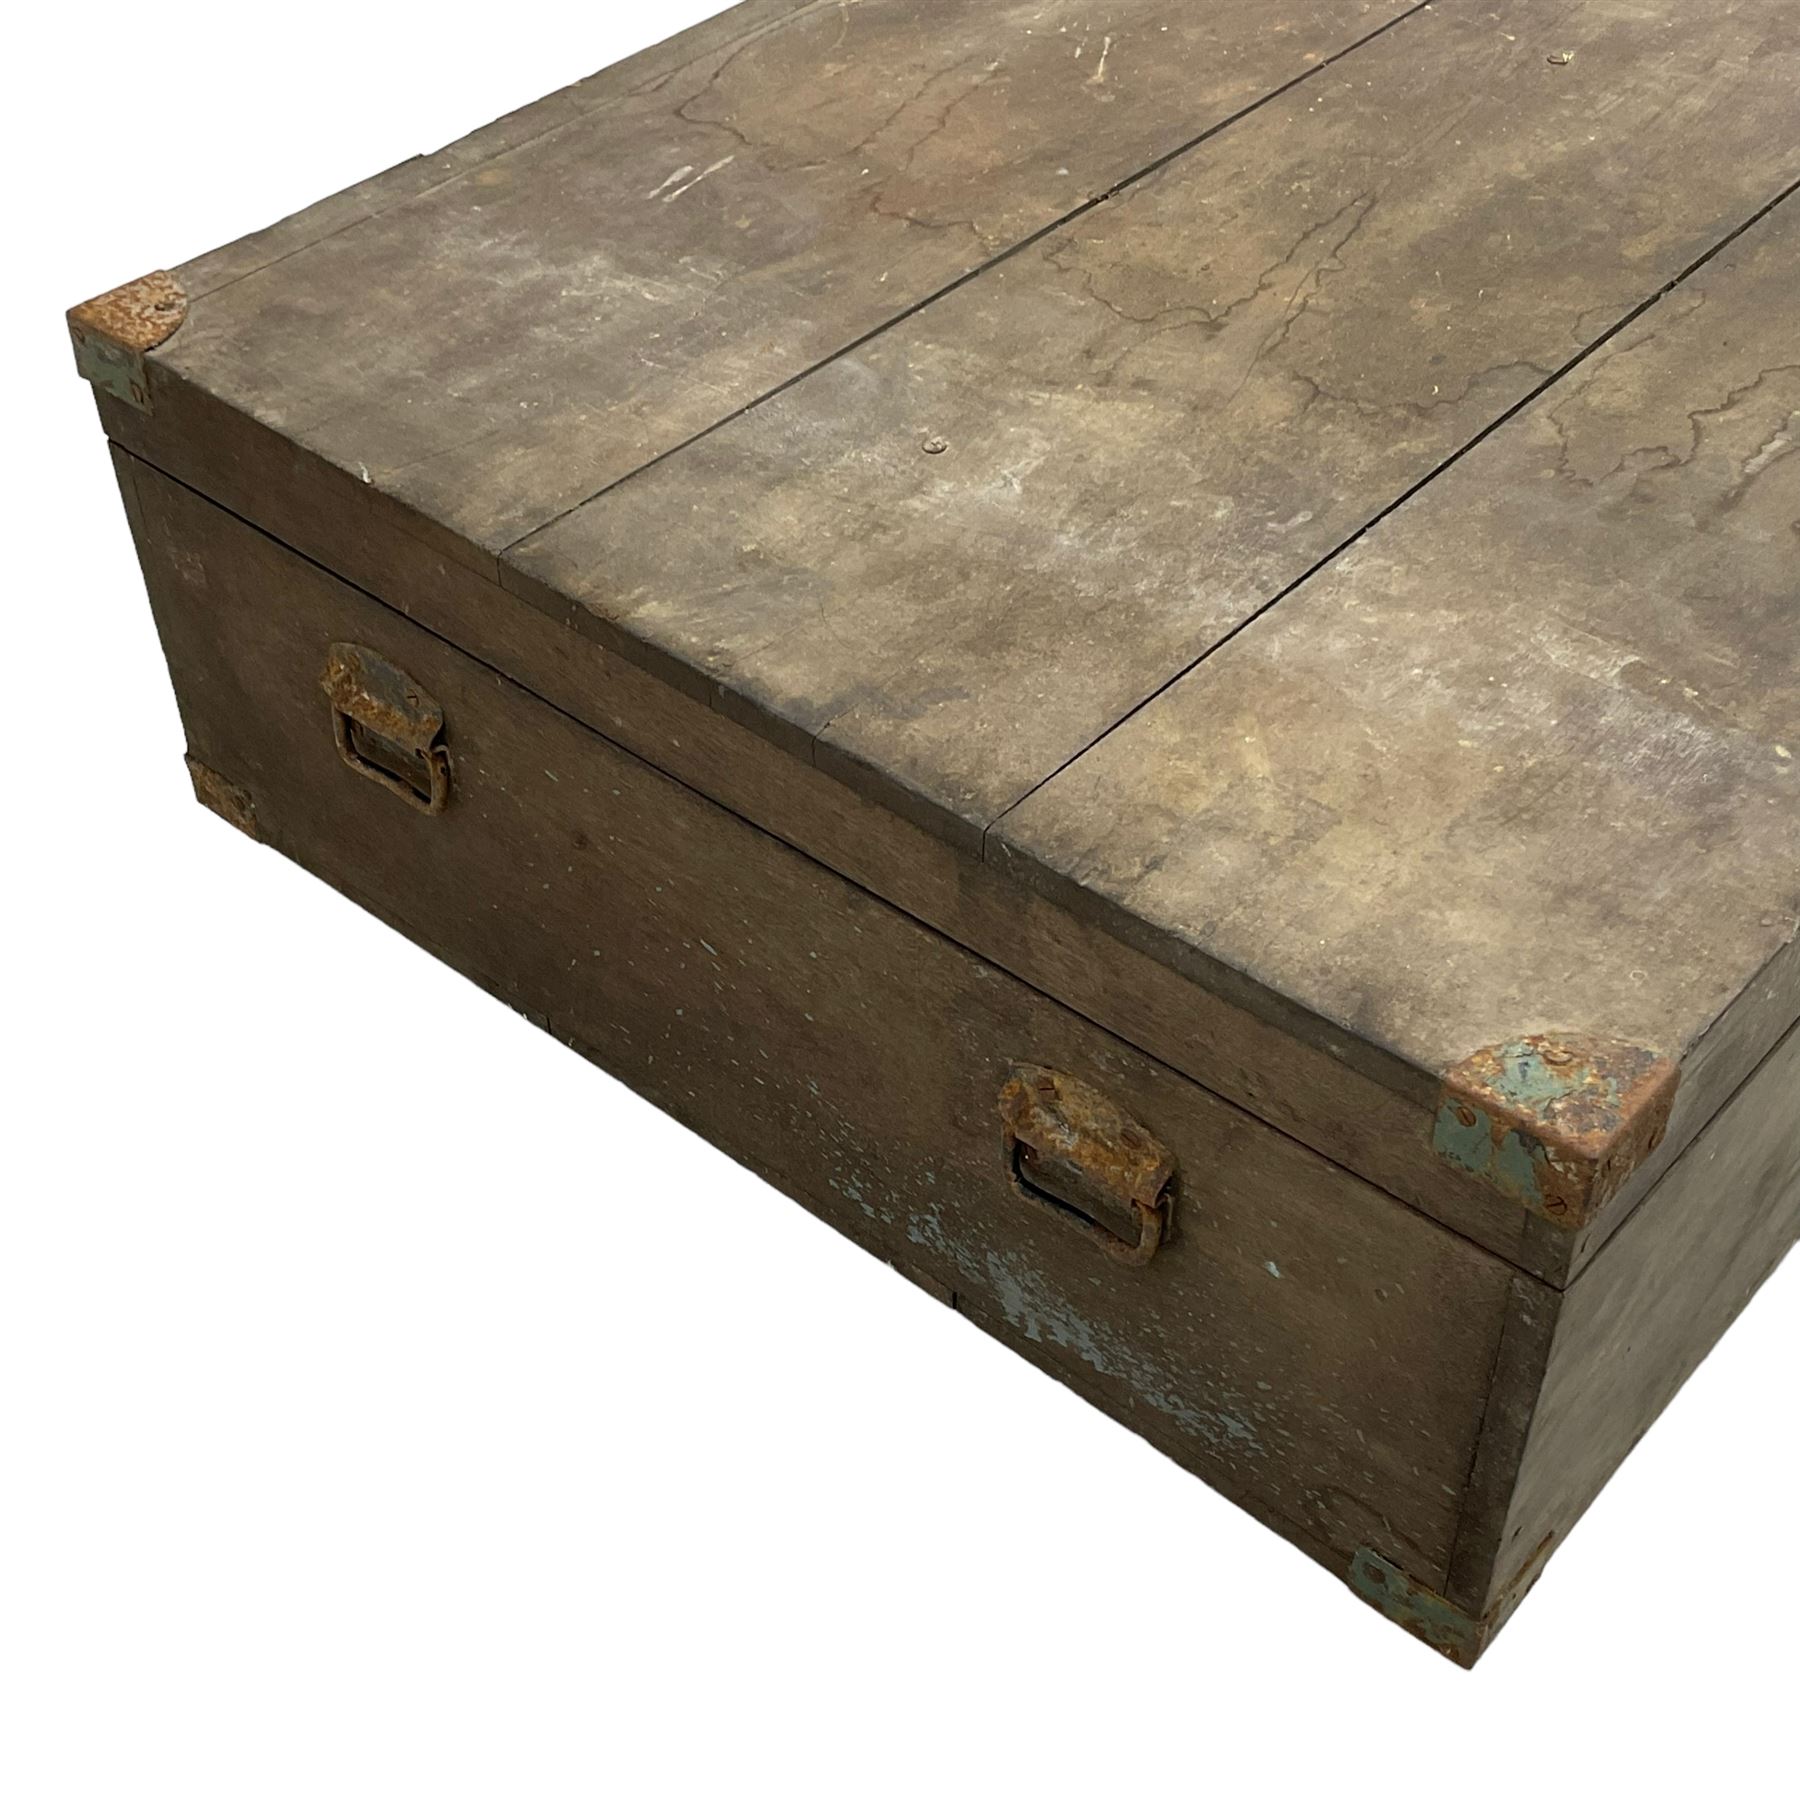 Large 19th century wooden touring trunk - Image 6 of 7